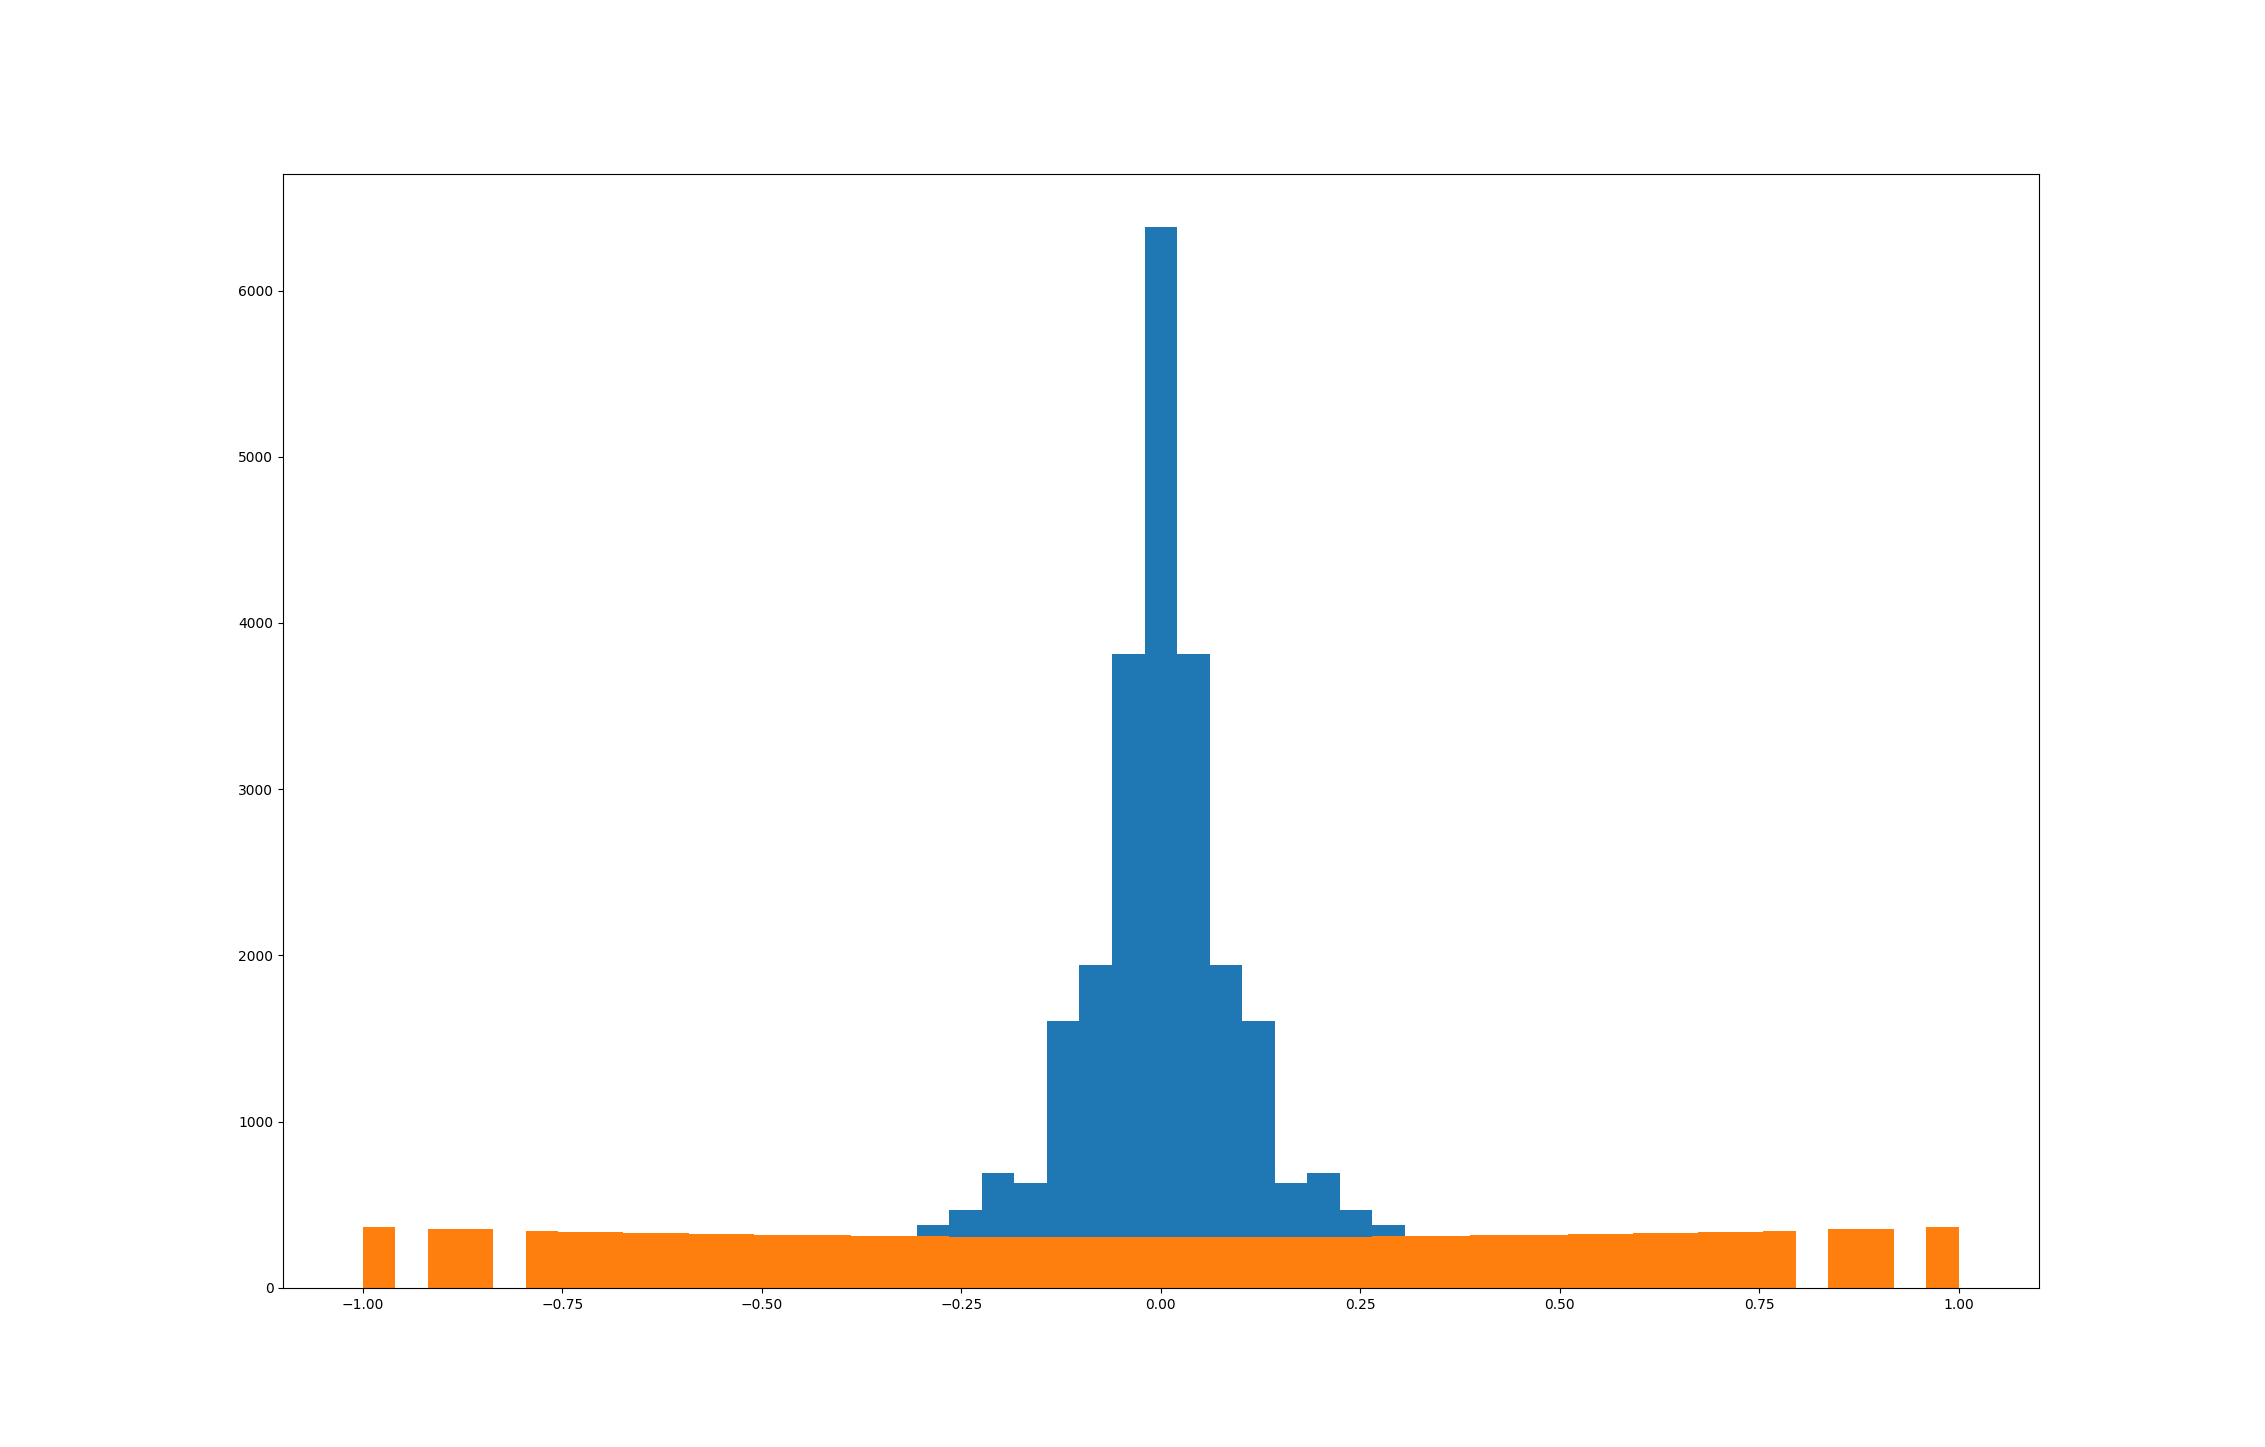 Steering Angle Distribtion for preprocessed (blue) and final respampled (orange) data sets in 500 bin histogram